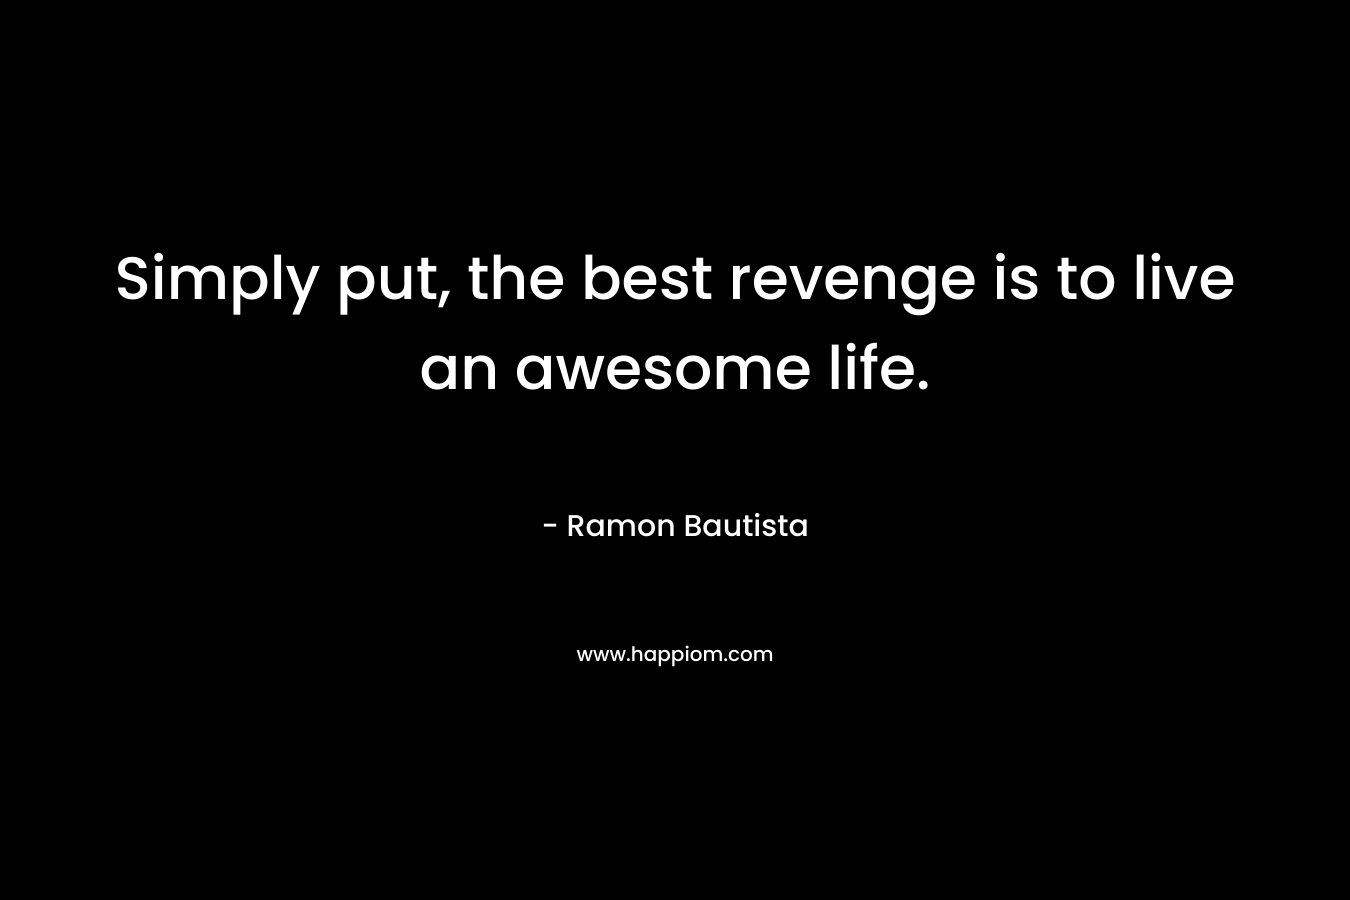 Simply put, the best revenge is to live an awesome life. – Ramon Bautista